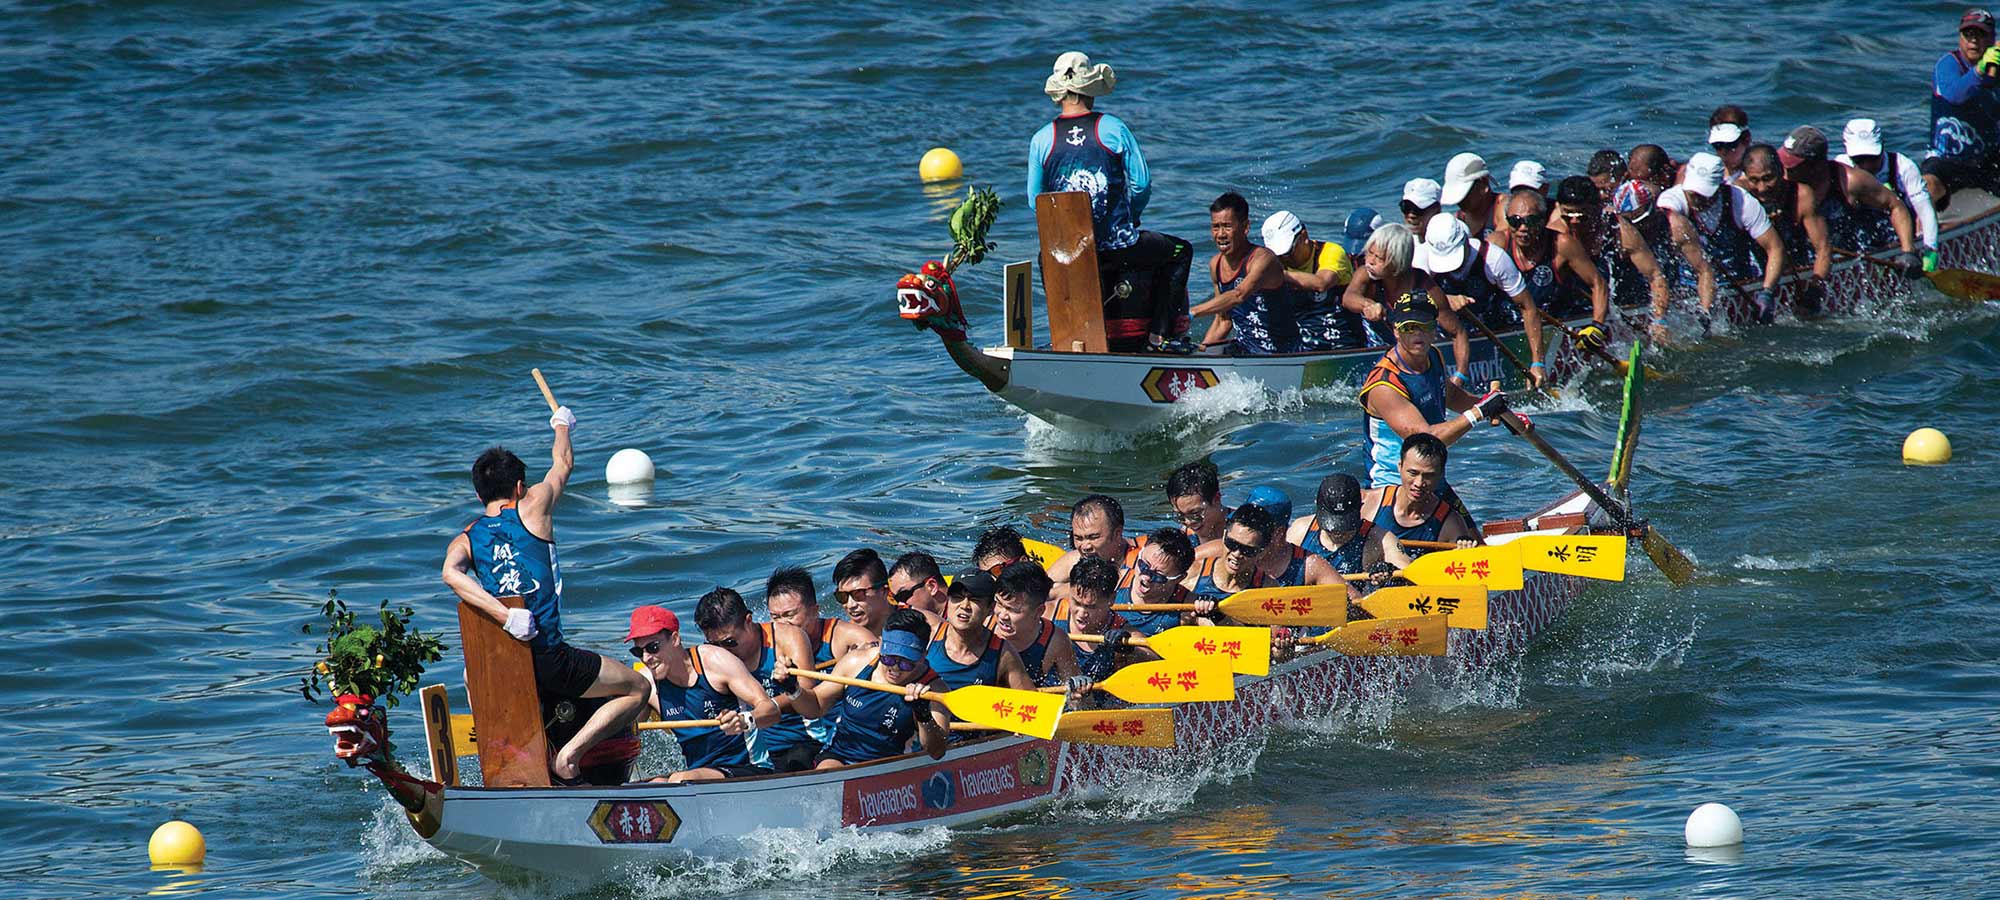 Competing in the 2019 Dragon Boat festival